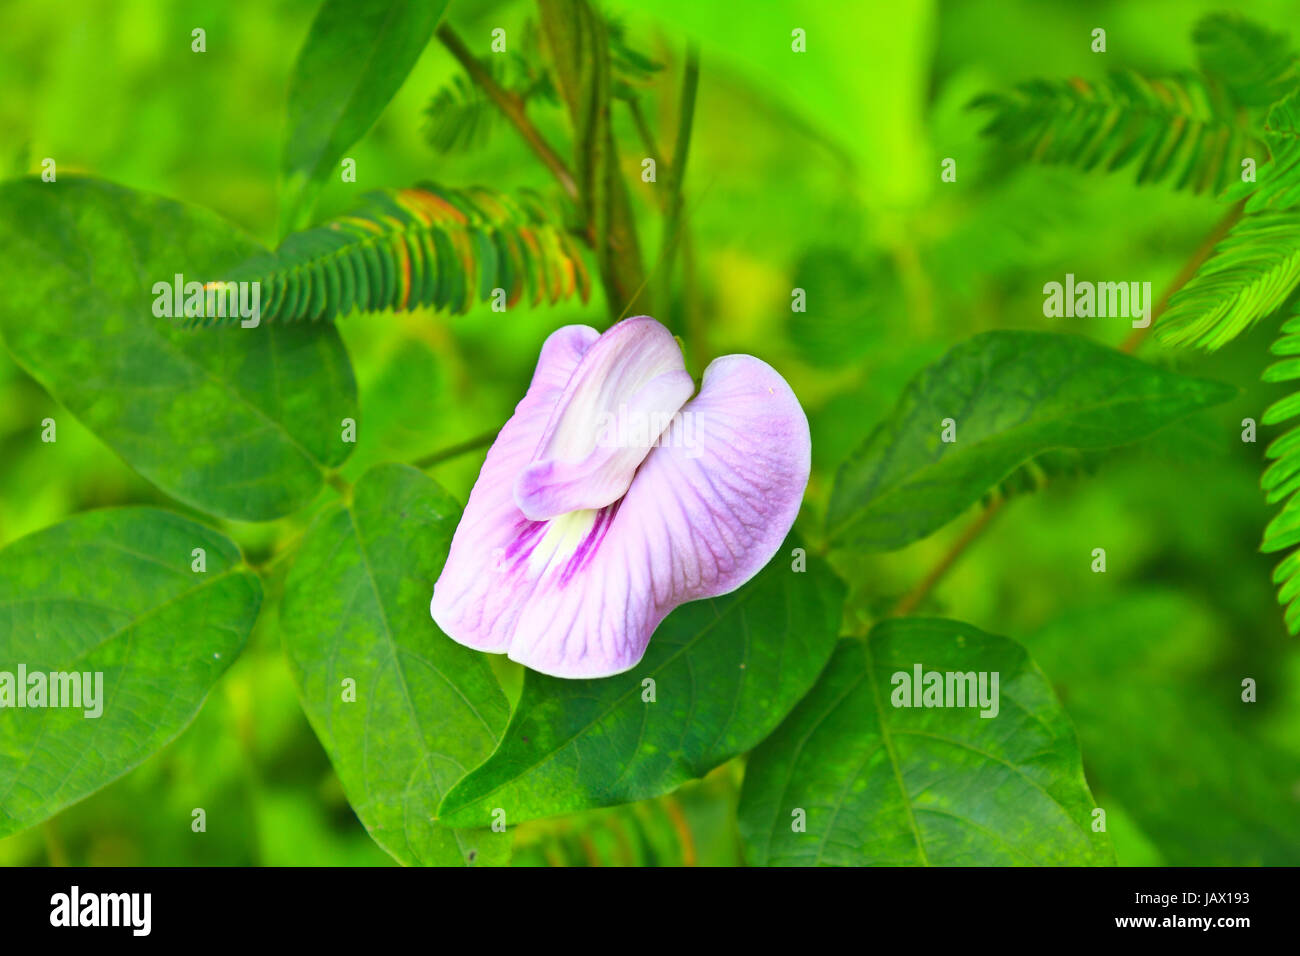 Pea flower or butterfly pea, flora in nature Stock Photo